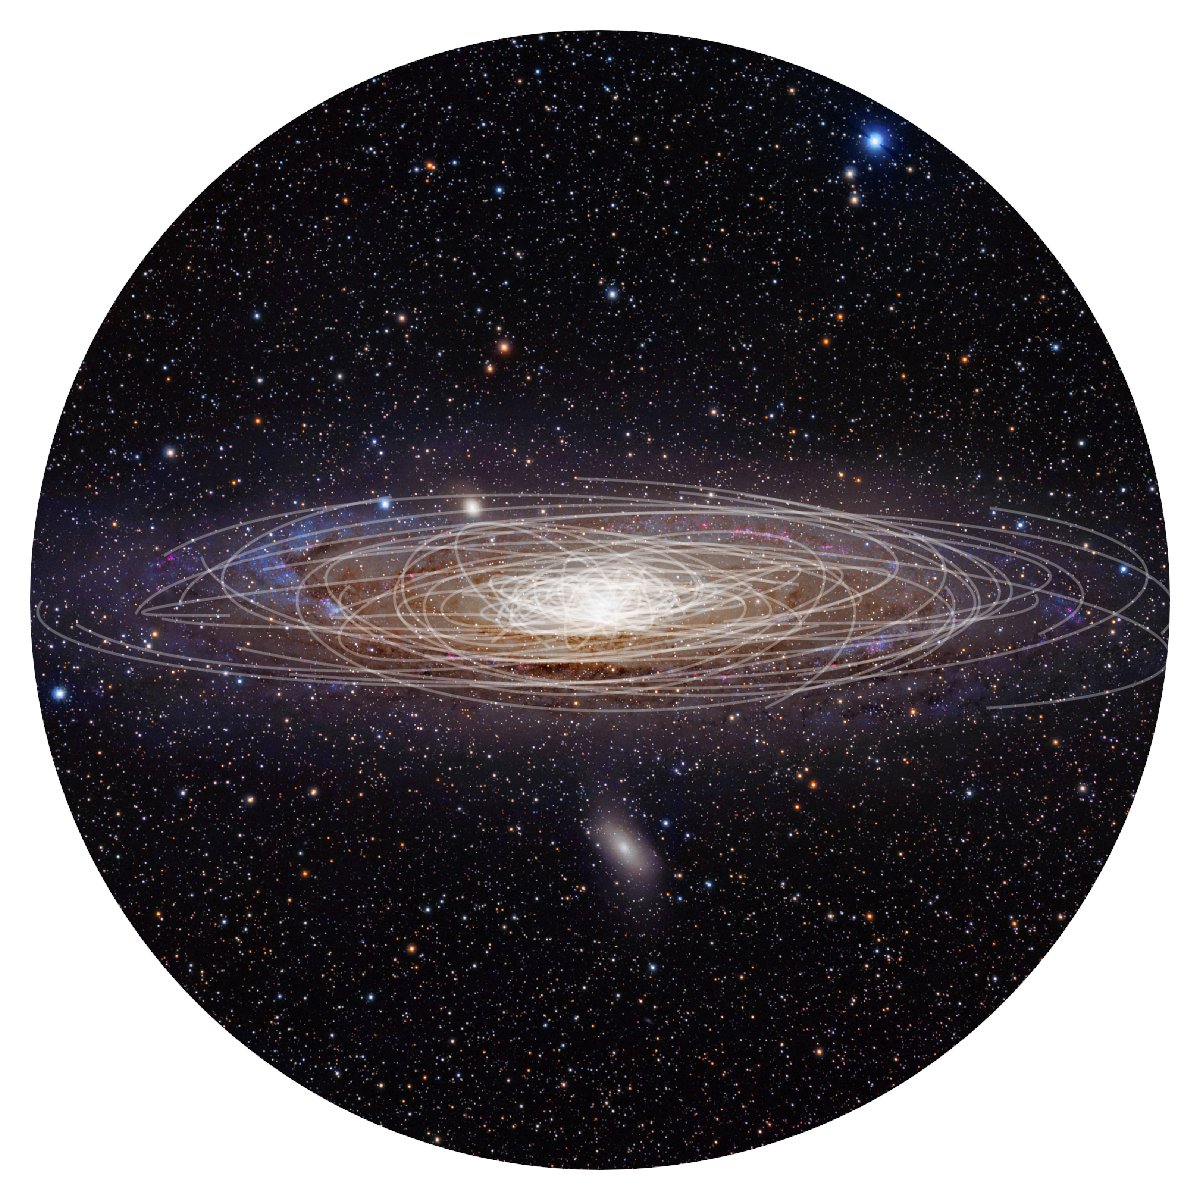 Applications open for the CCA Applied Galactic Dynamics Summer School, deadline 2/15. The school's aim is to make progress on outstanding problems in galaxy formation and the distribution/nature of dark matter...and it has a fun website! galacticdynamics.nyc